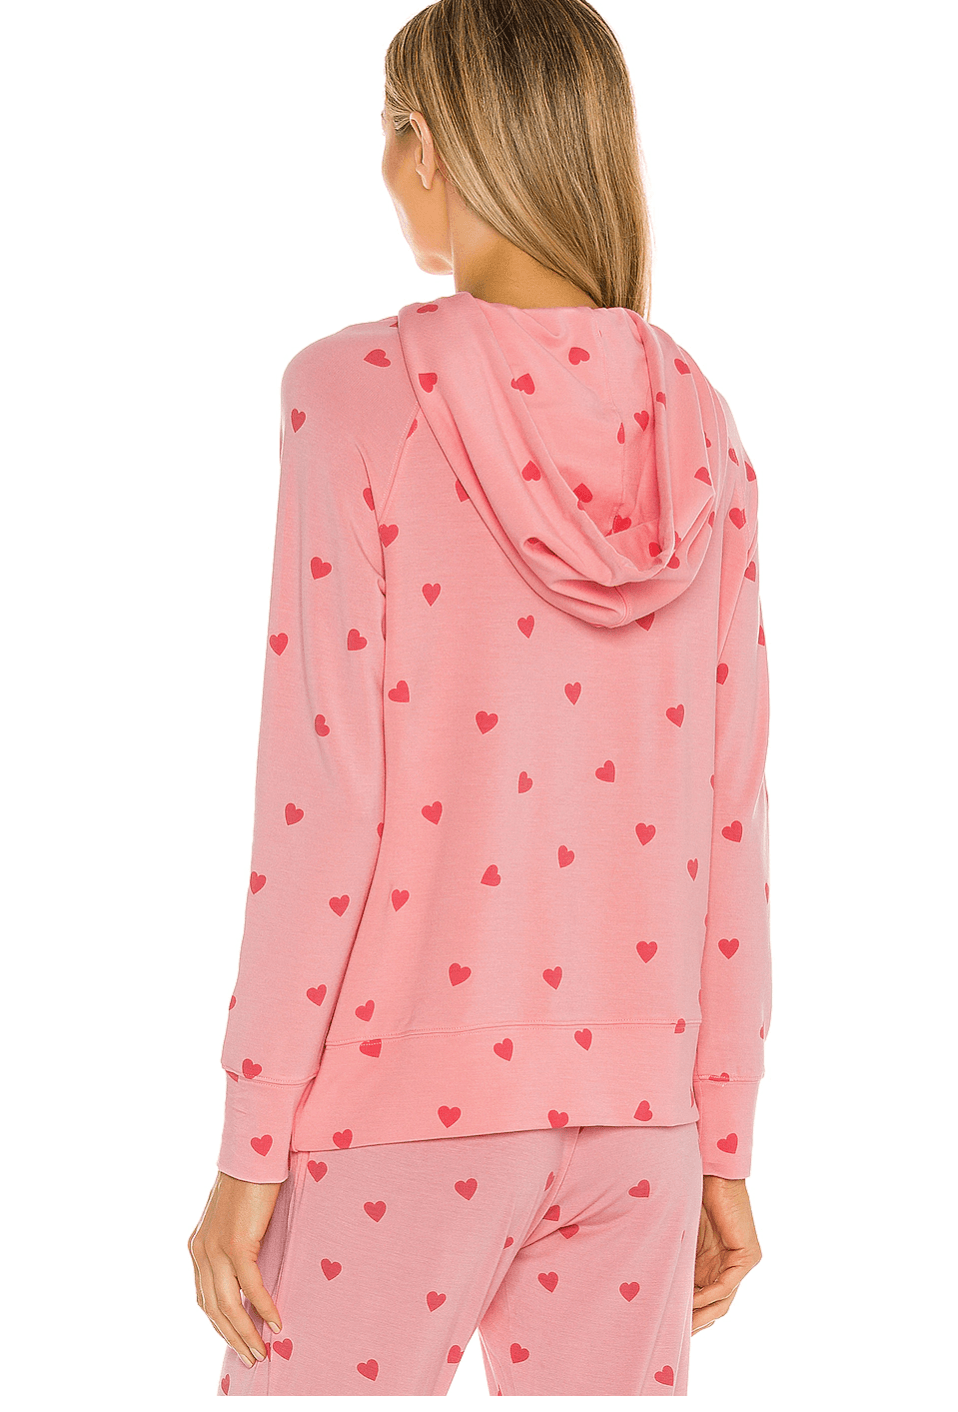 Stripe & Stare - Heart Throb Hoodie - OutDazl